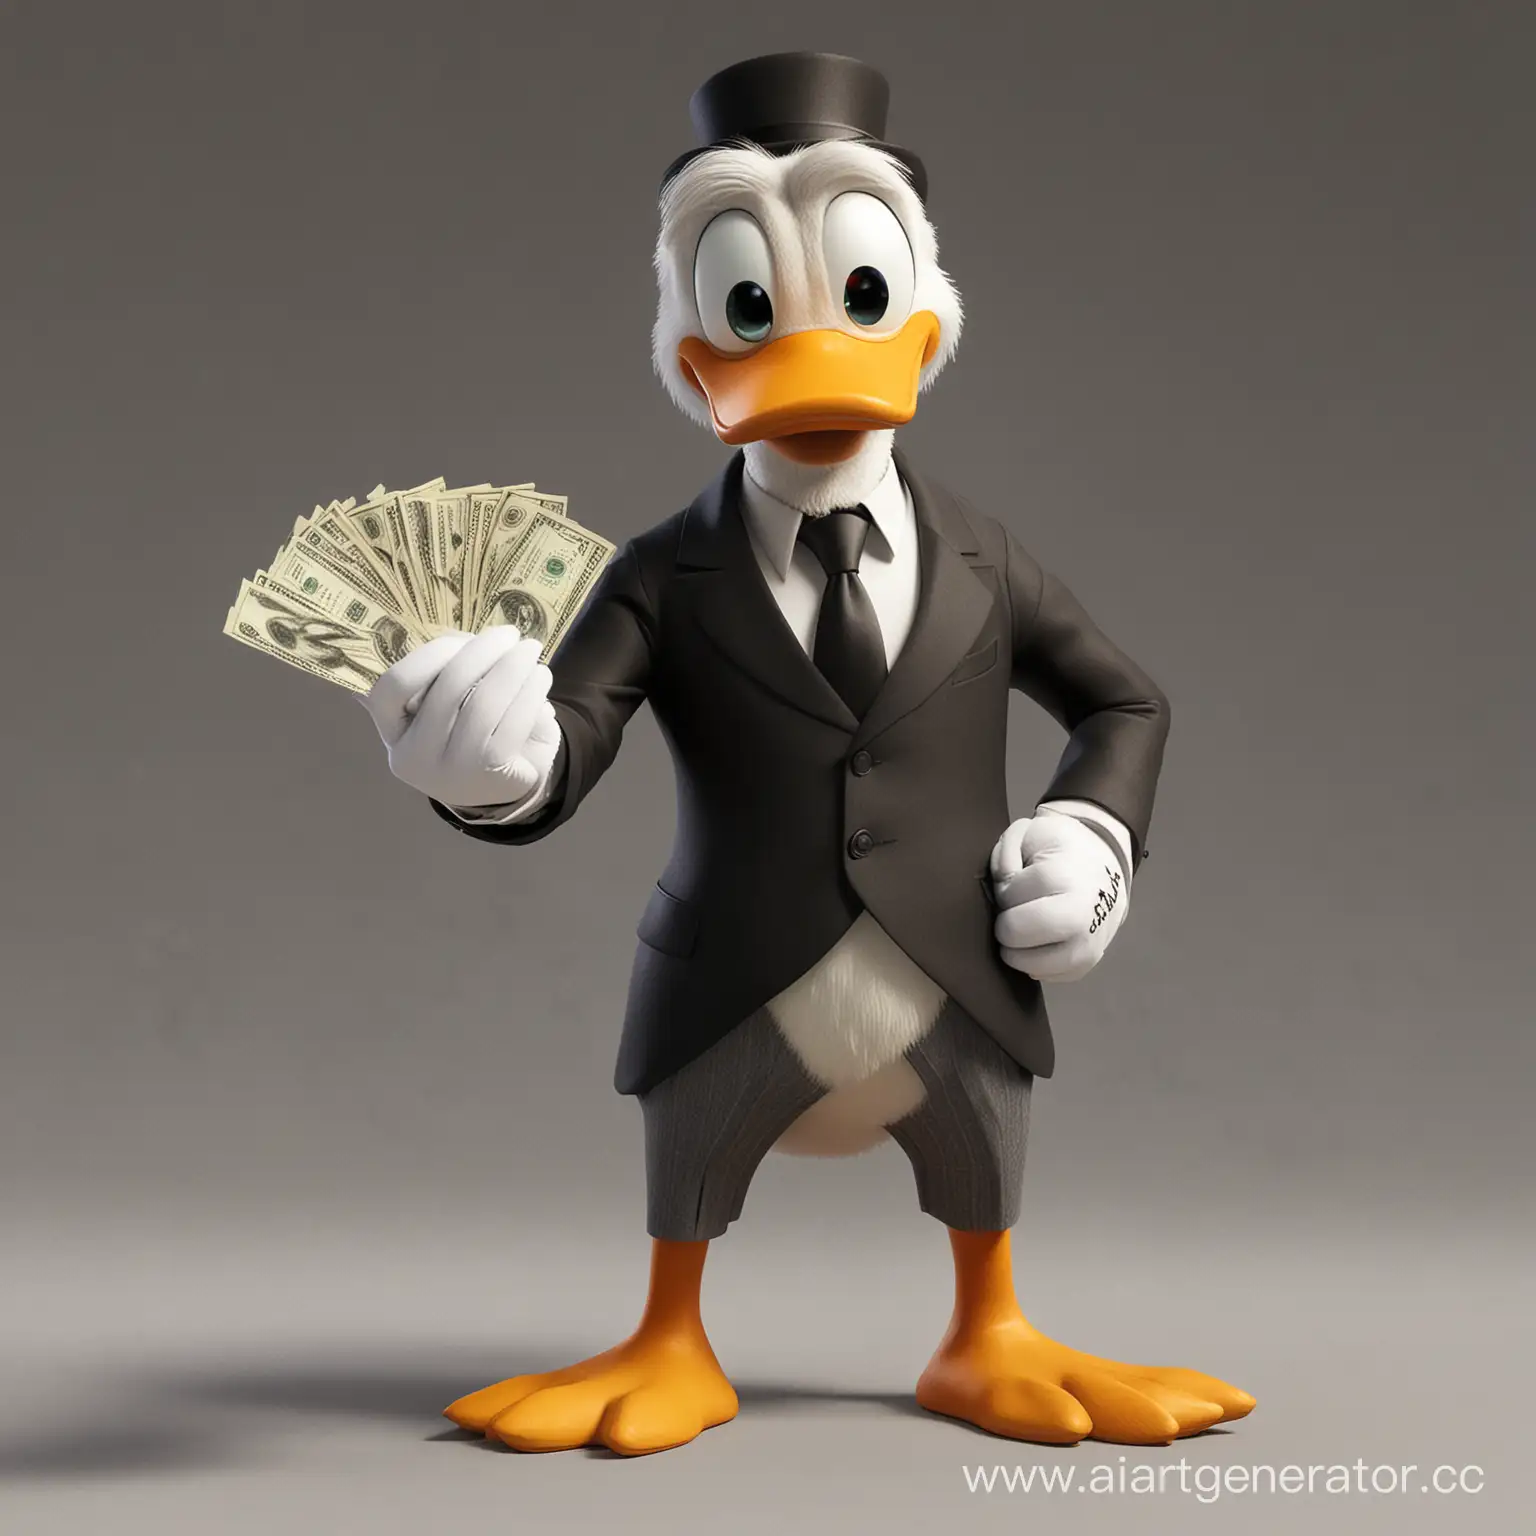 Wealthy-Scrooge-McDuck-Displaying-Money-in-a-Formal-Suit